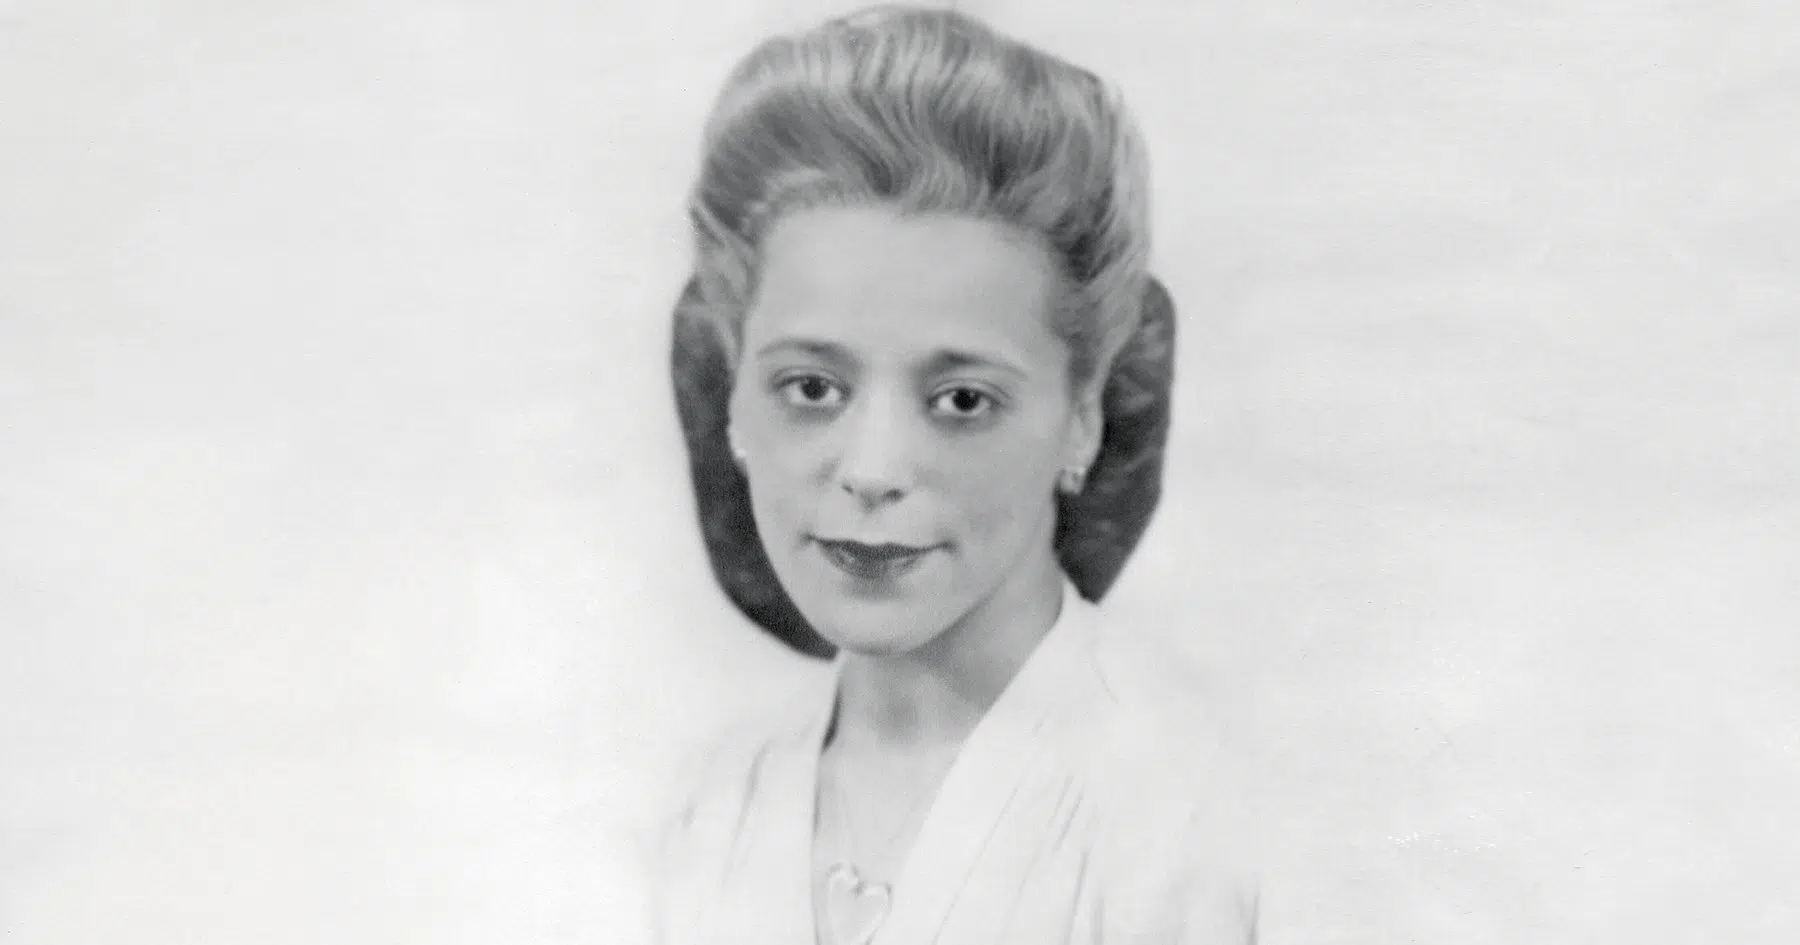 Monument for Viola Desmond will be built in the North End